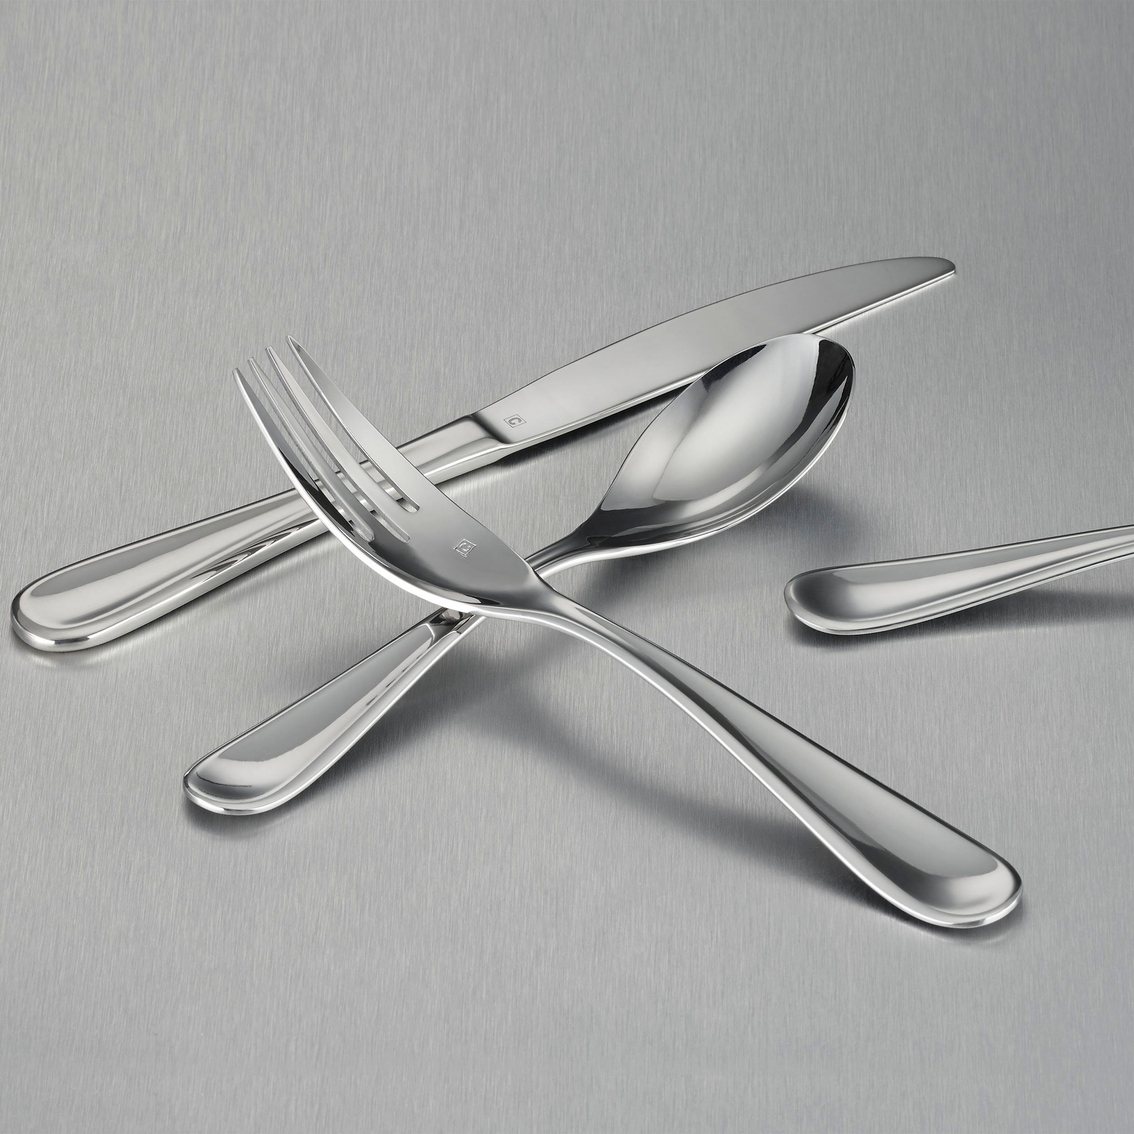 Cuisinart Maree Collection 20 pc. Flatware Set - Image 2 of 2